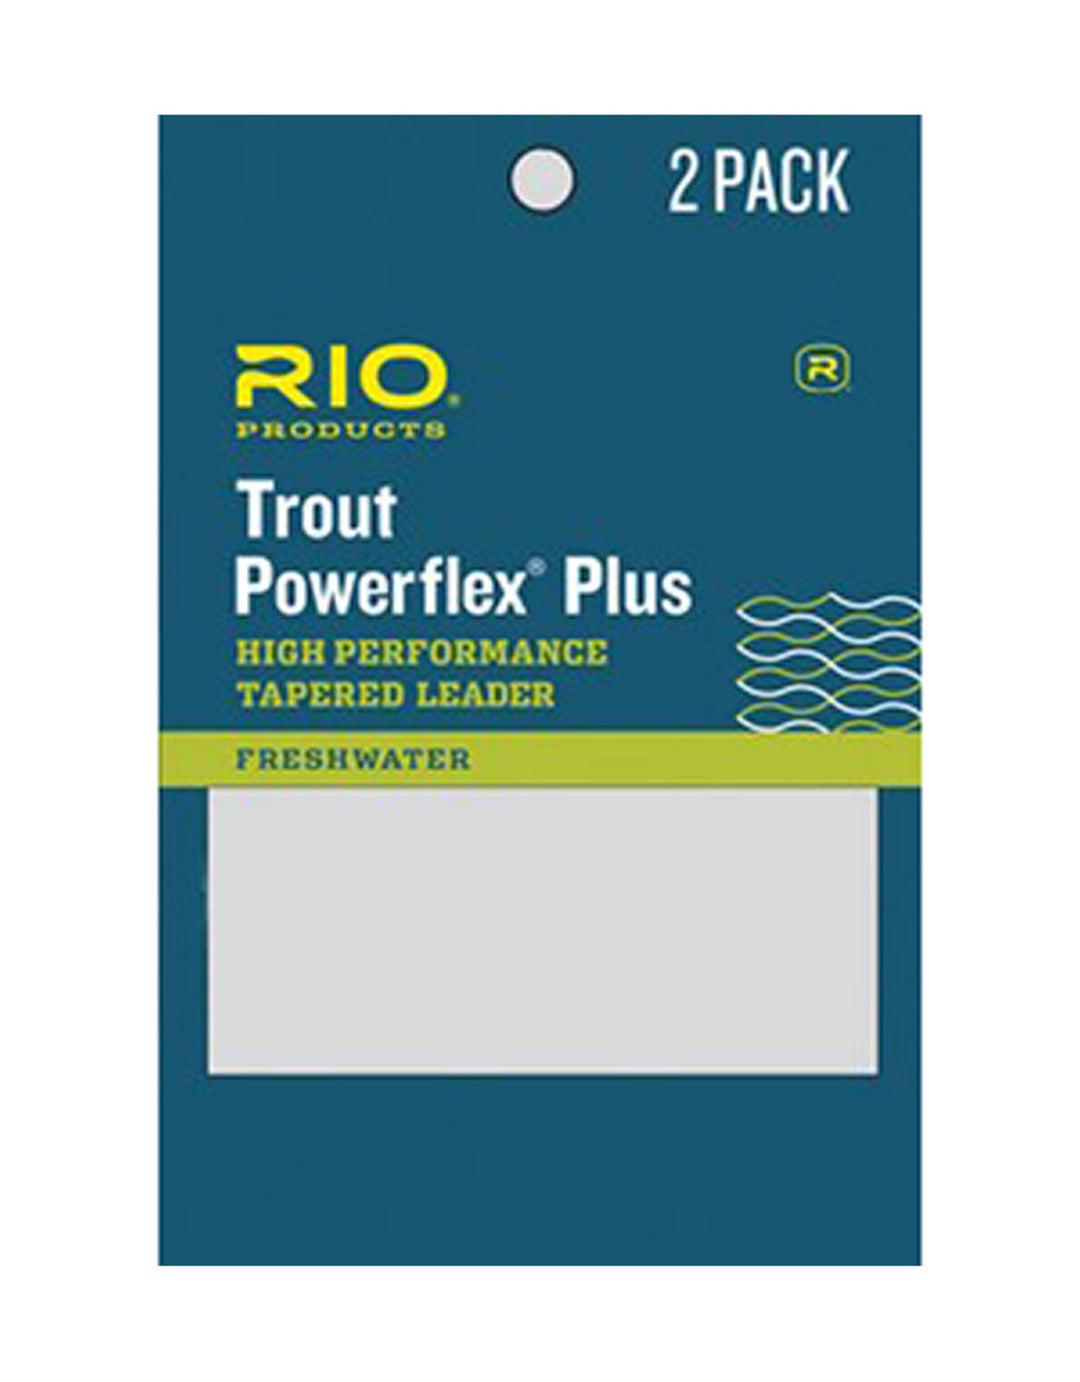 RIO Trout Powerflex PLUS 7.5 6x (2 Pack) - Strongest and Most Reliable Trout Leaders for Dry Flies, Soft Hackles, Nymph Rigs, and Streamers